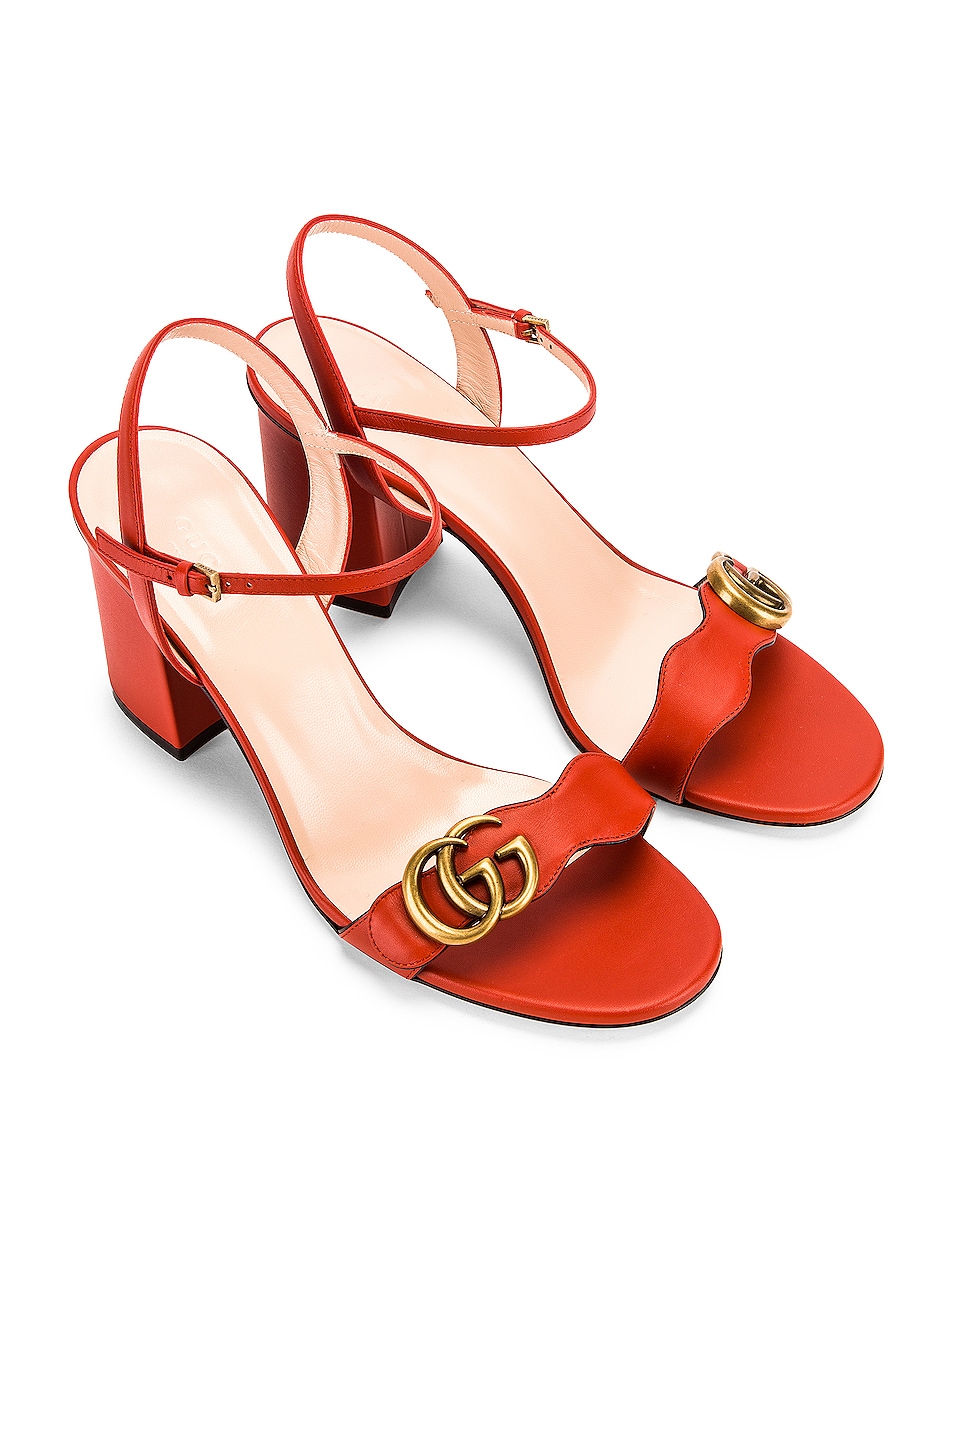 Image 1 of Gucci Leather Mid Heel Sandals in Bright Pumpkin